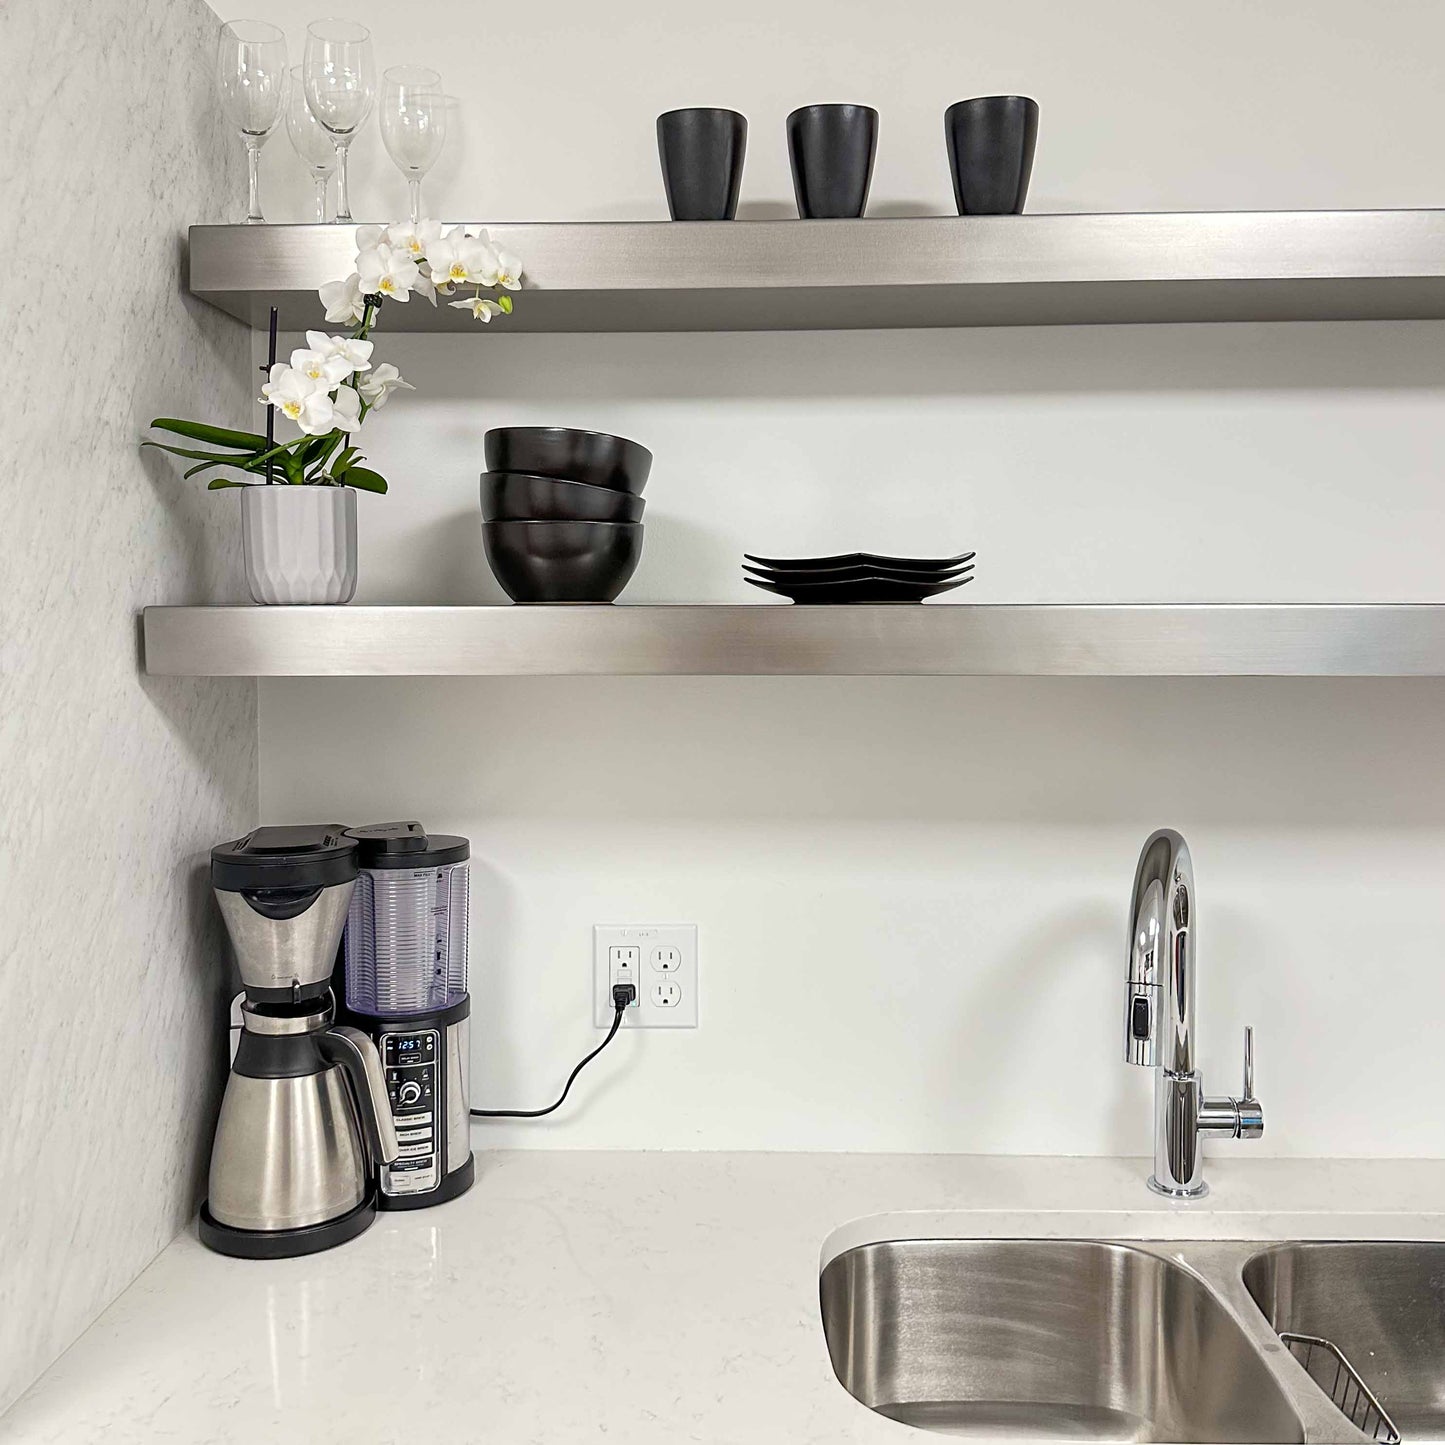 Stainless Steel Floating Shelf 12" Deep for Kitchen, Bathroom and Home